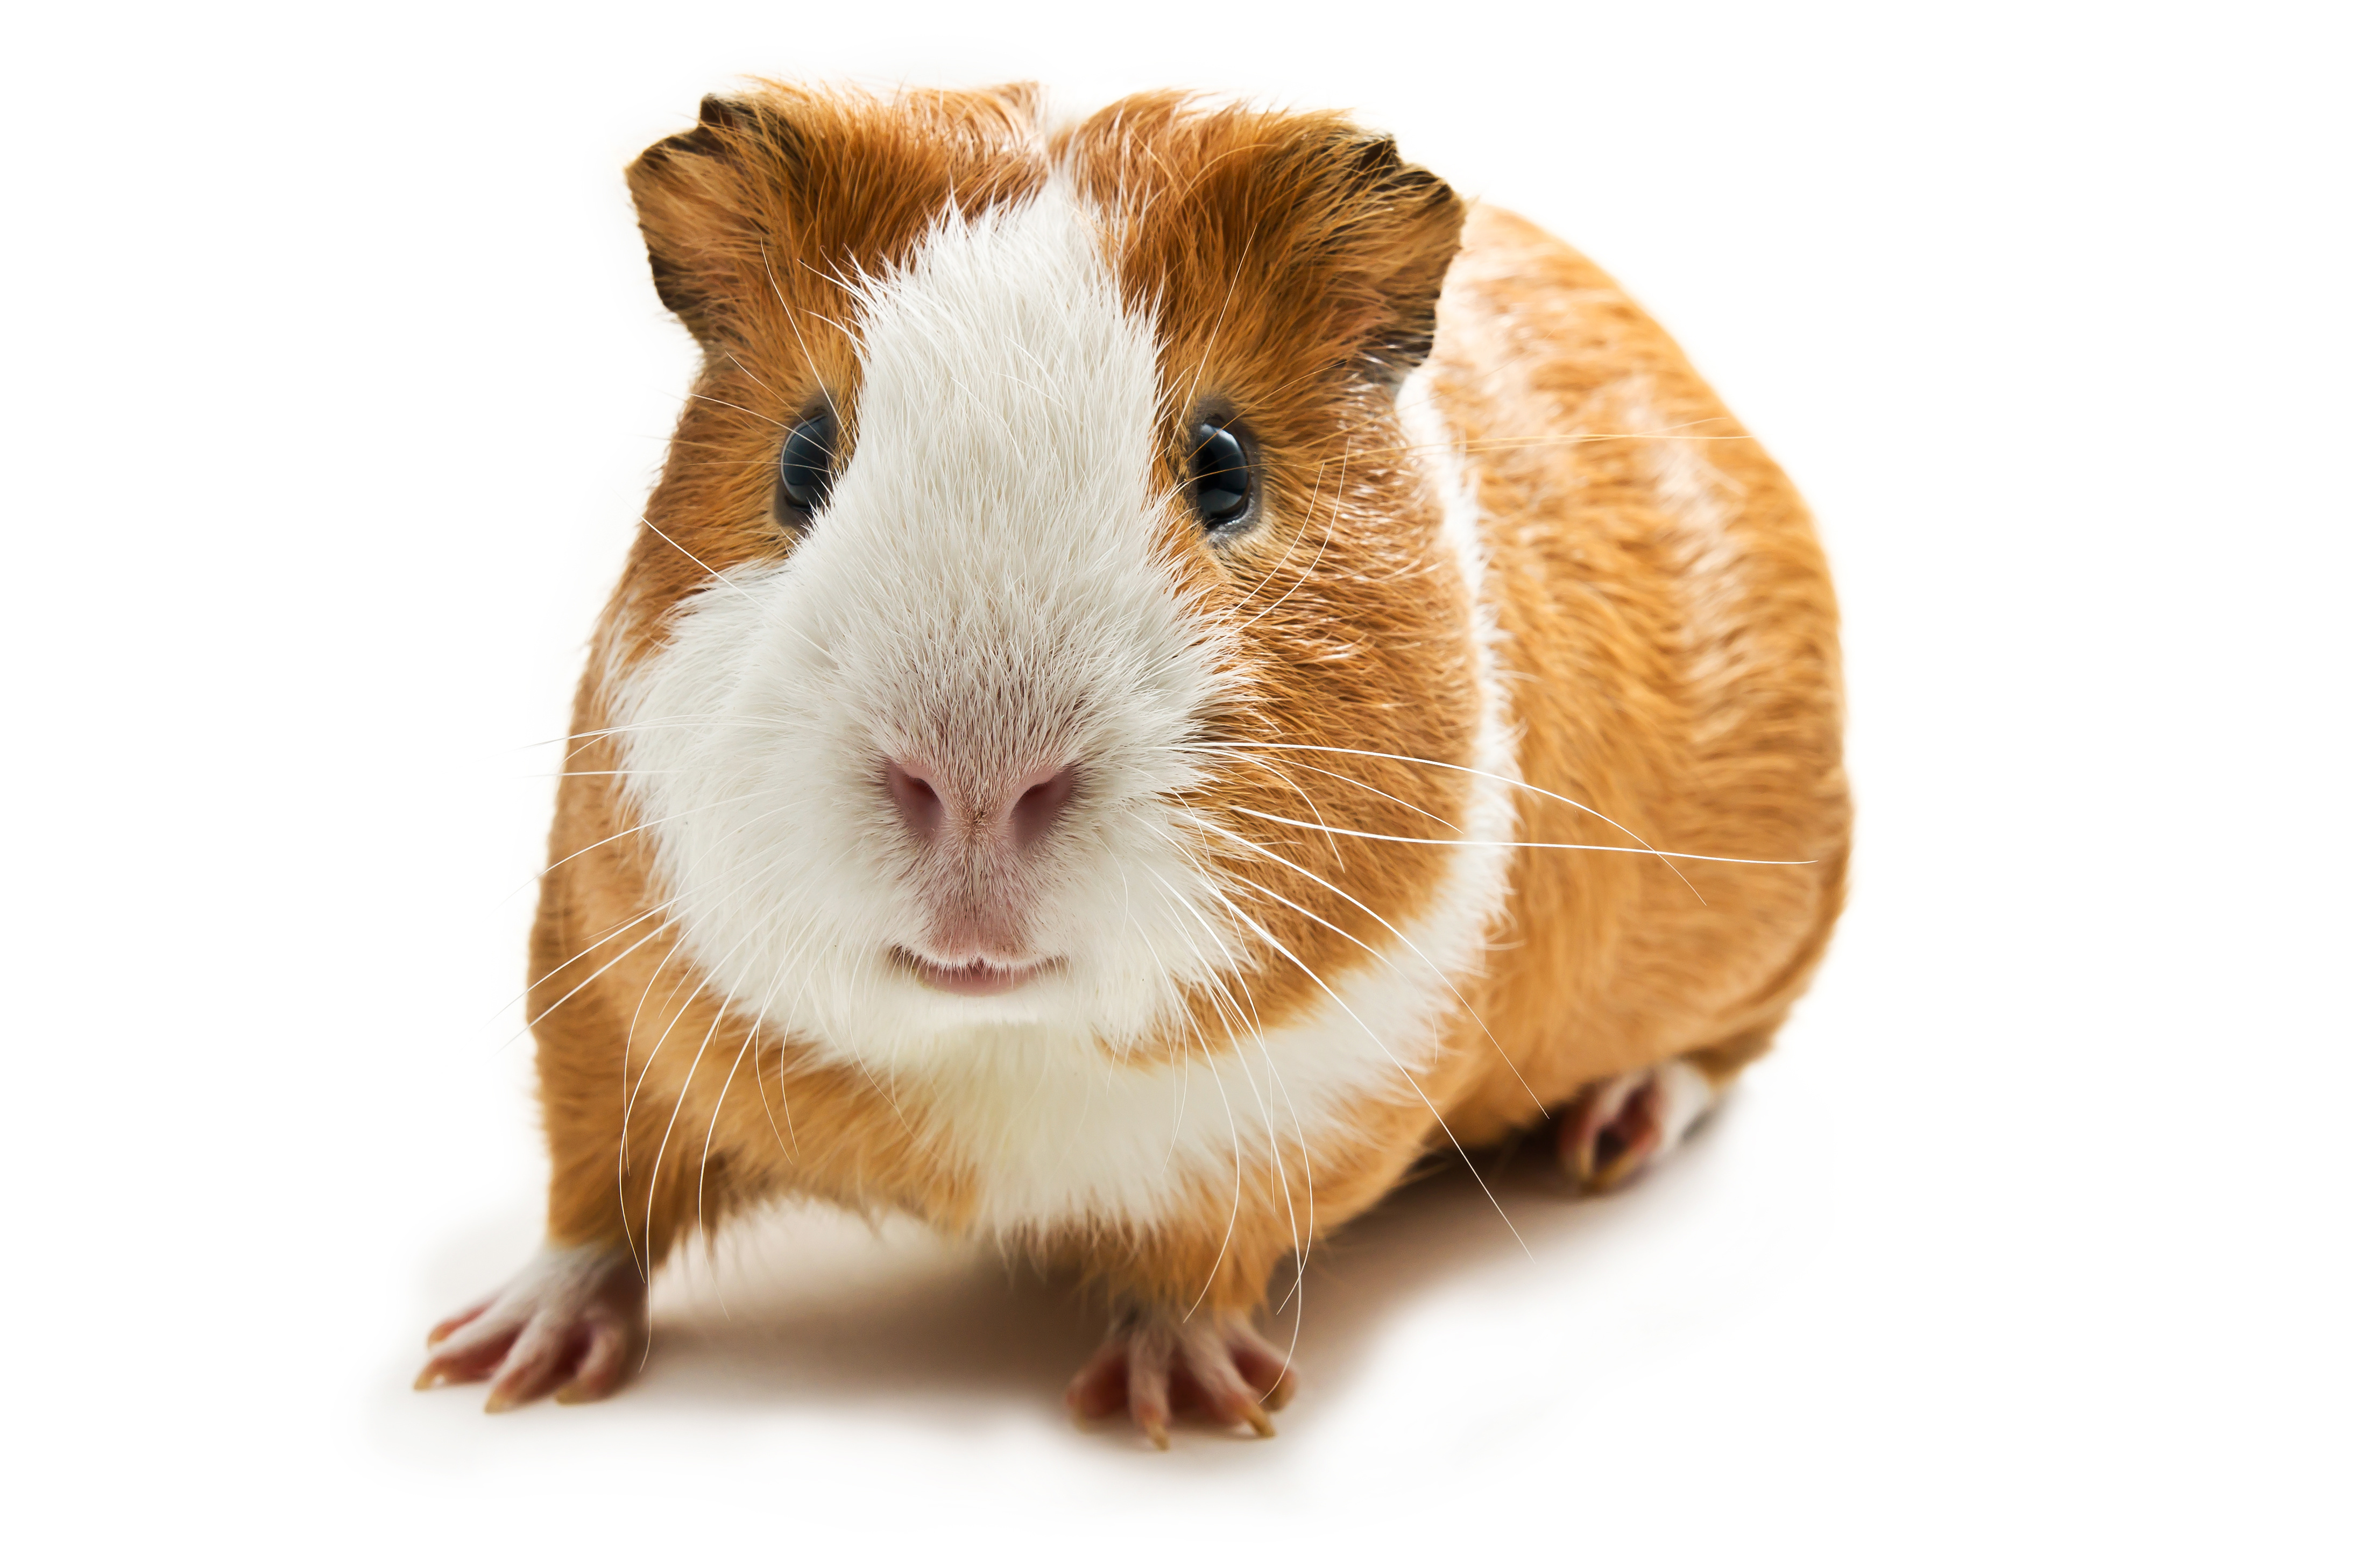 Will you be a 'guinea pig' if you 